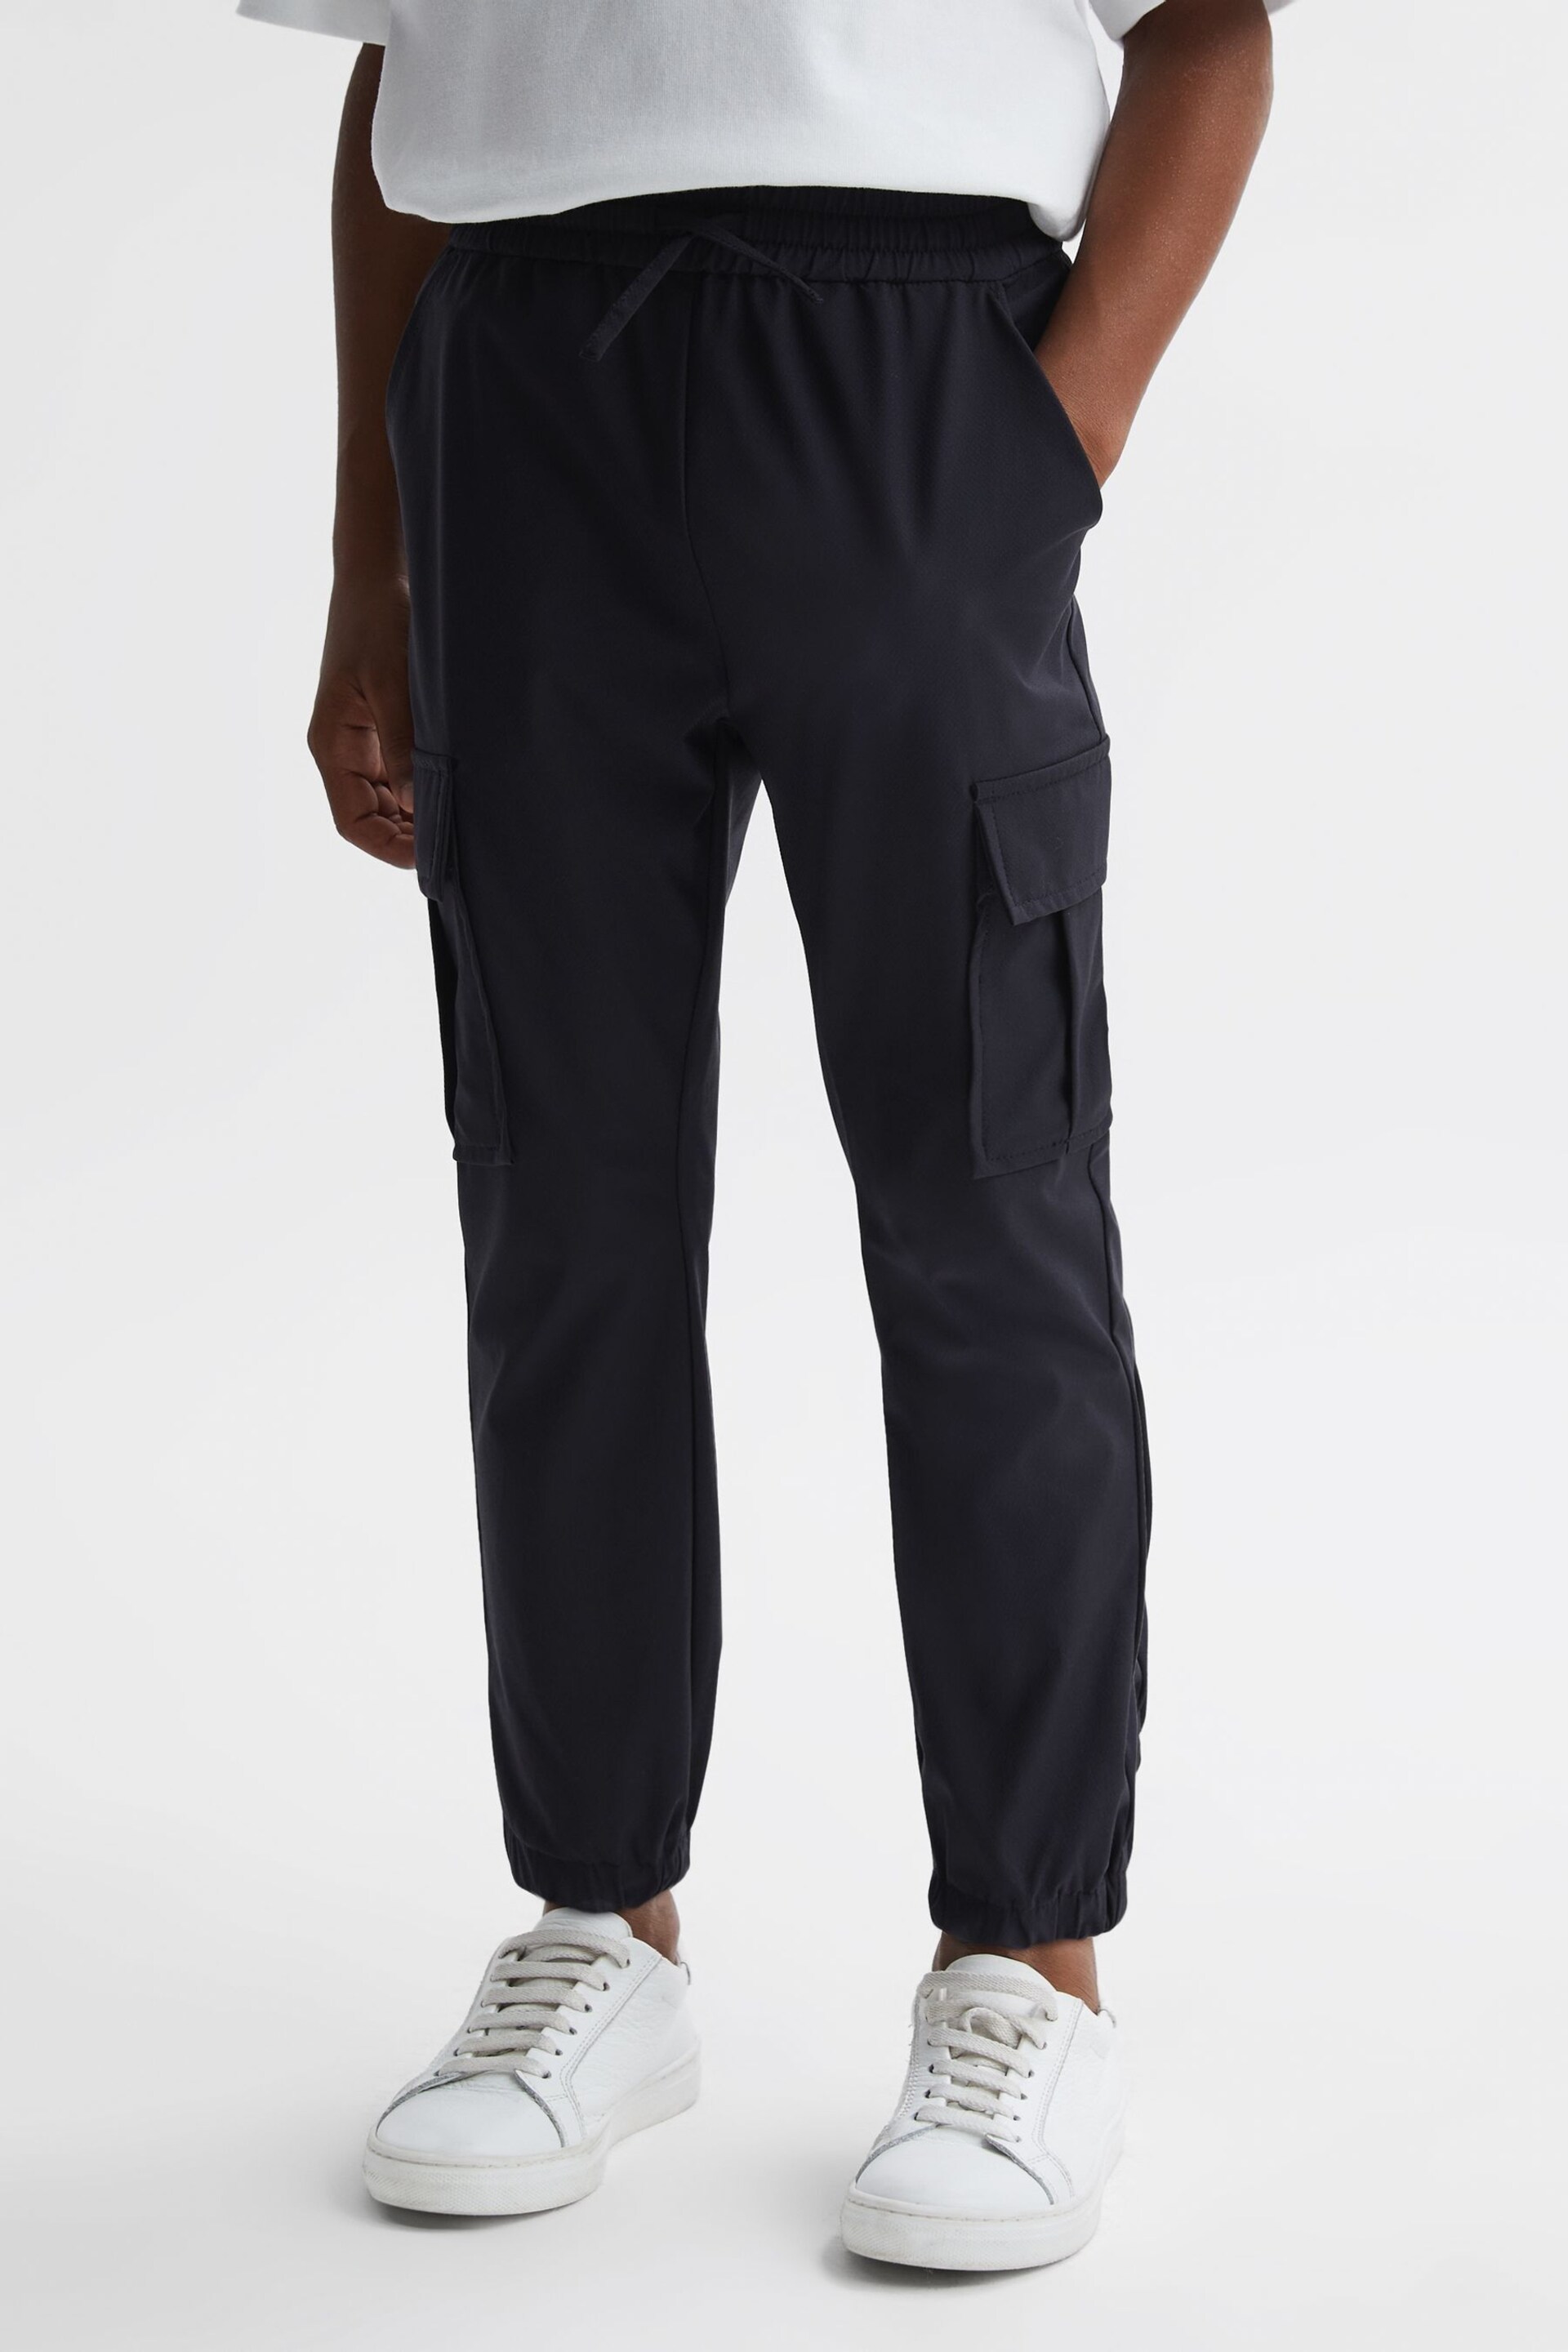 Reiss Navy Lucian Junior Technical Drawstring Cuffed Joggers - Image 1 of 5